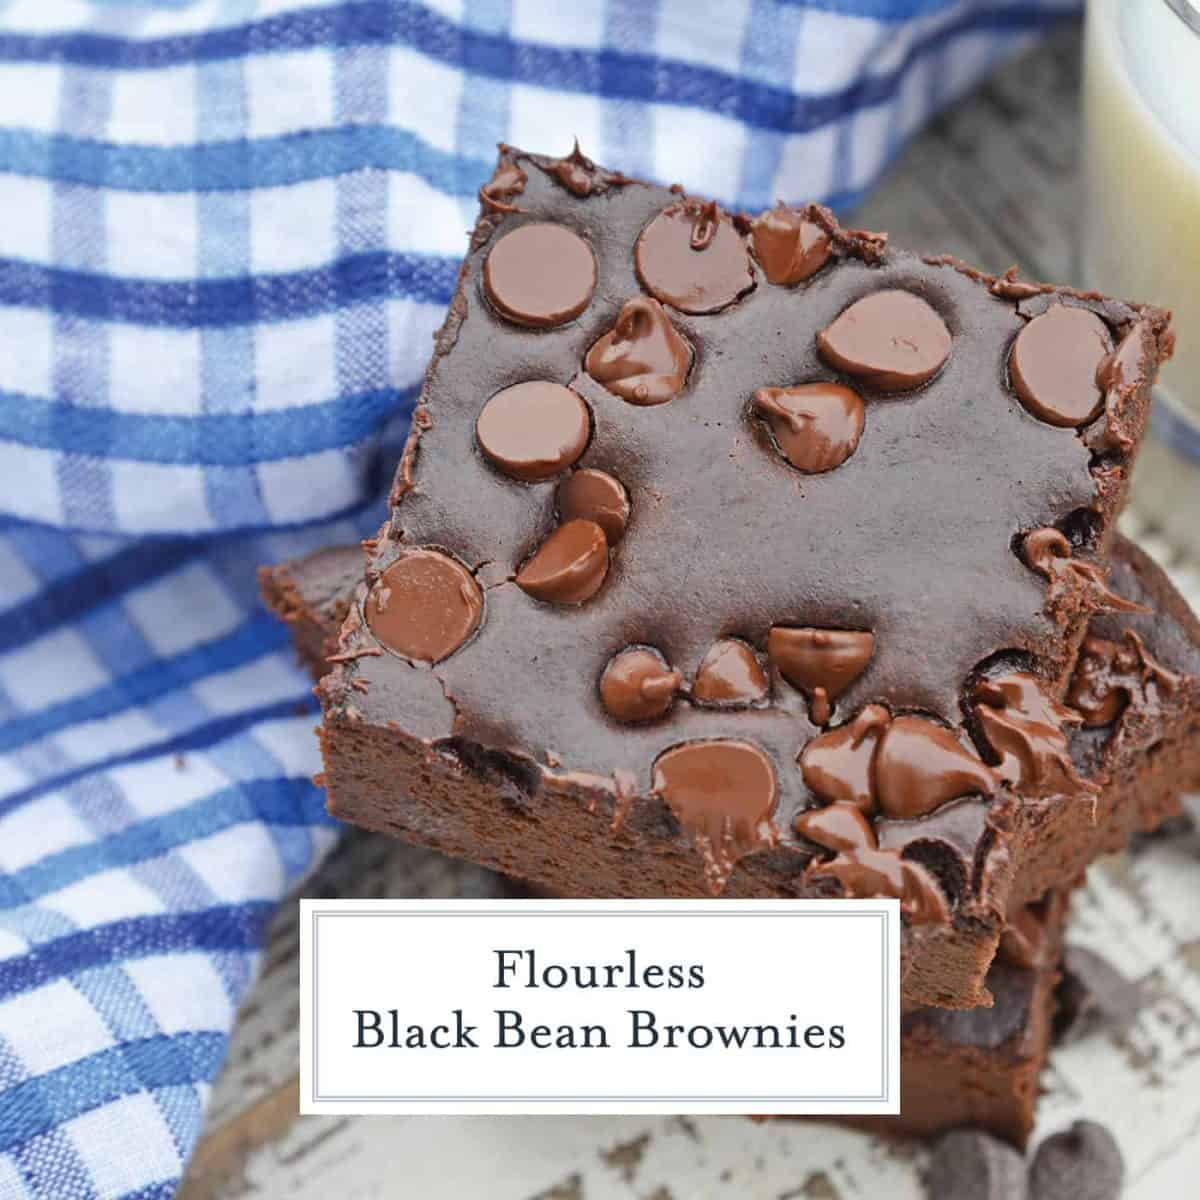 Flourless Black Bean Brownies are a delicious, fudgy gluten free brownie recipe. Healthy brownie recipes have never tasted this good! #glutenfreebrownies #homemadebrownies #flourlessbrownies #blackbeanbrownies www.savoryexperiments.com